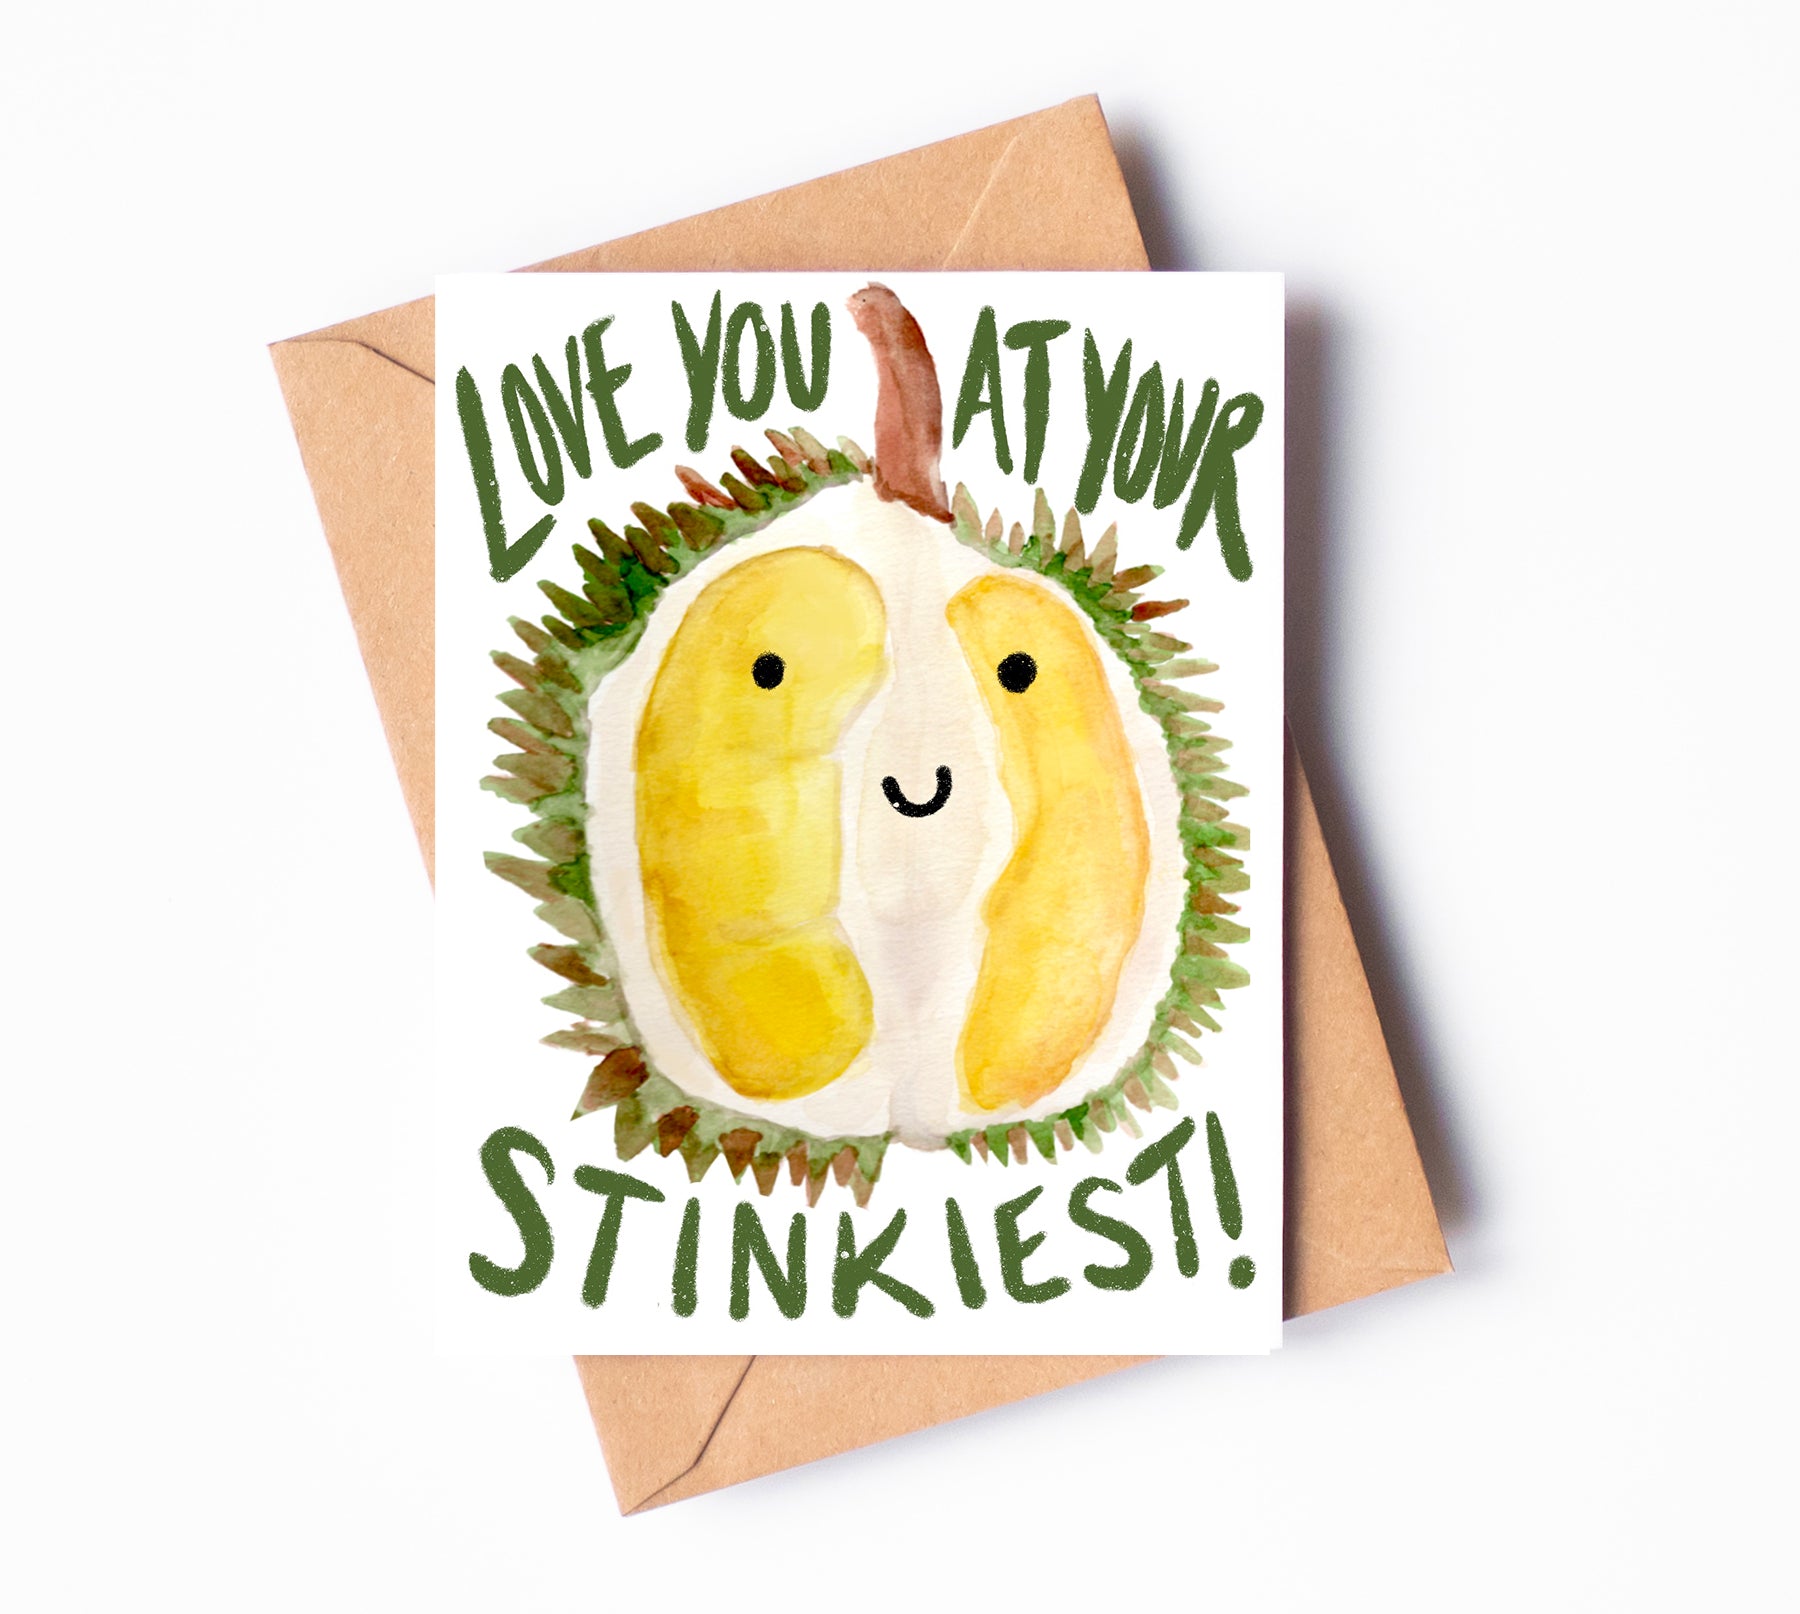 A watercolor greeting card with a cut open green and yellow durian and the phrase "Love you at your stinkiest!"